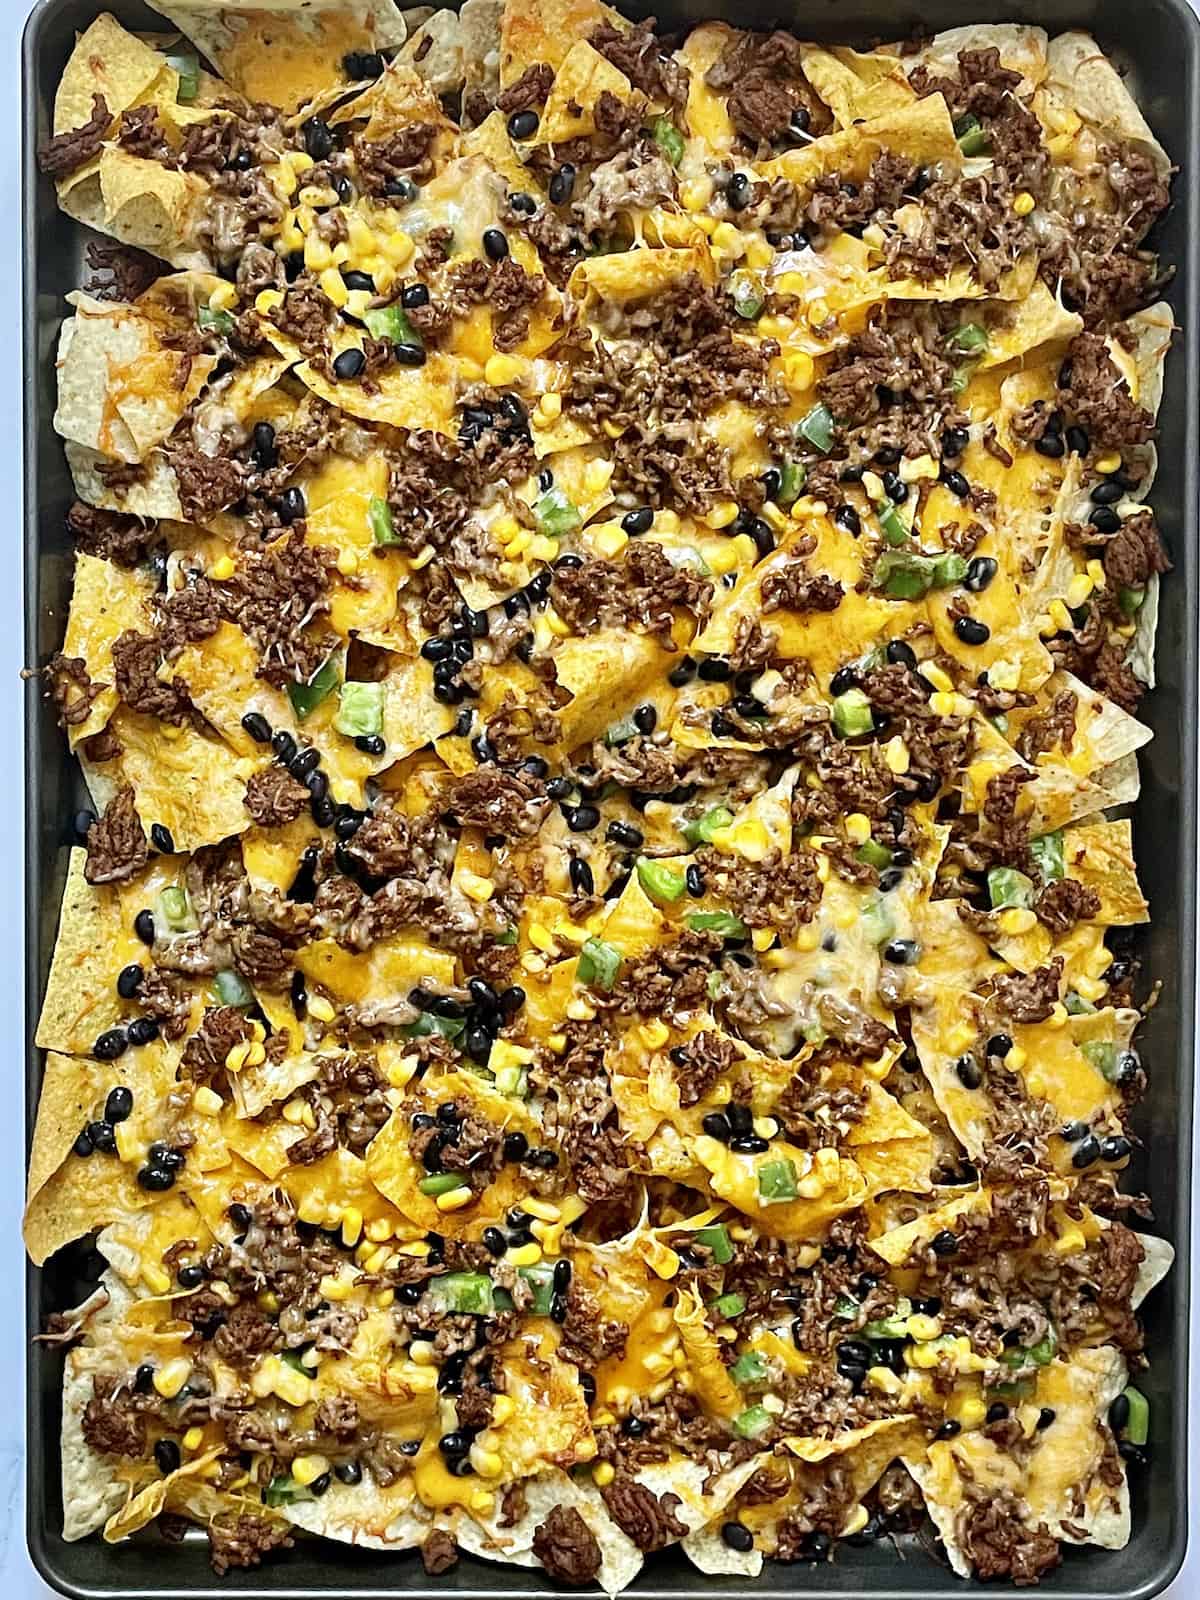 tortilla chips topped with cheese, beans, peppers, and beef cooked on a sheet pan